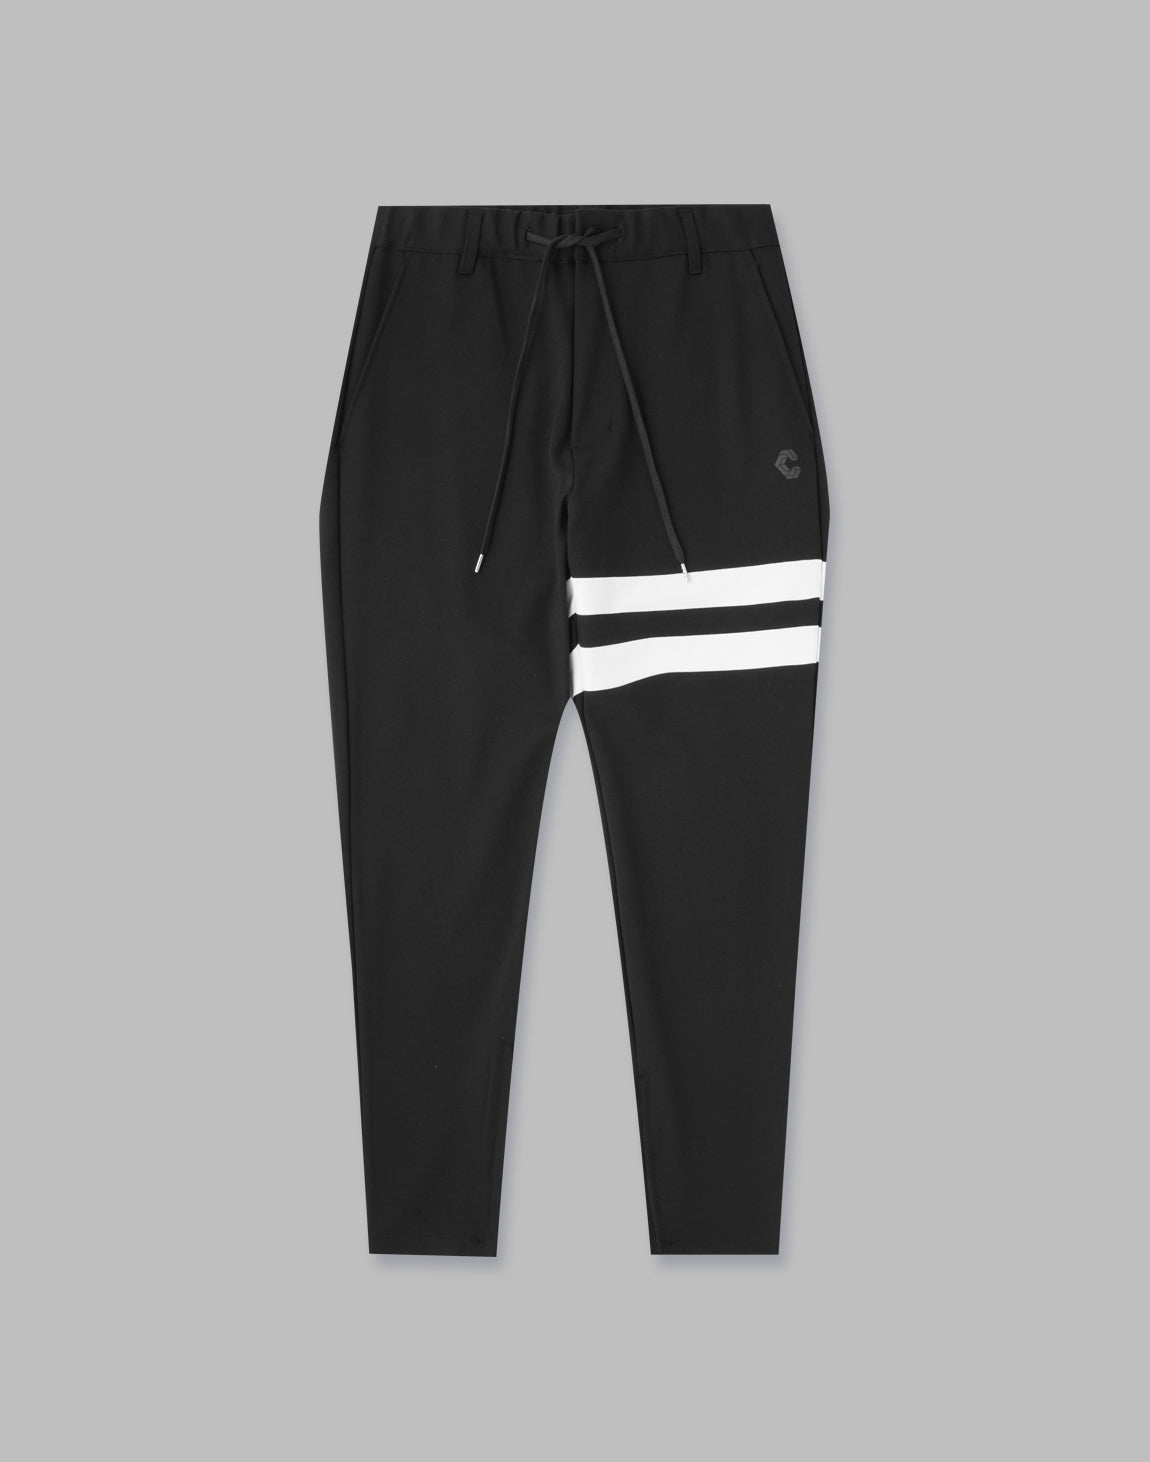 CRONOS BLACK LINED TROUSER – クロノス CRONOS Official Store